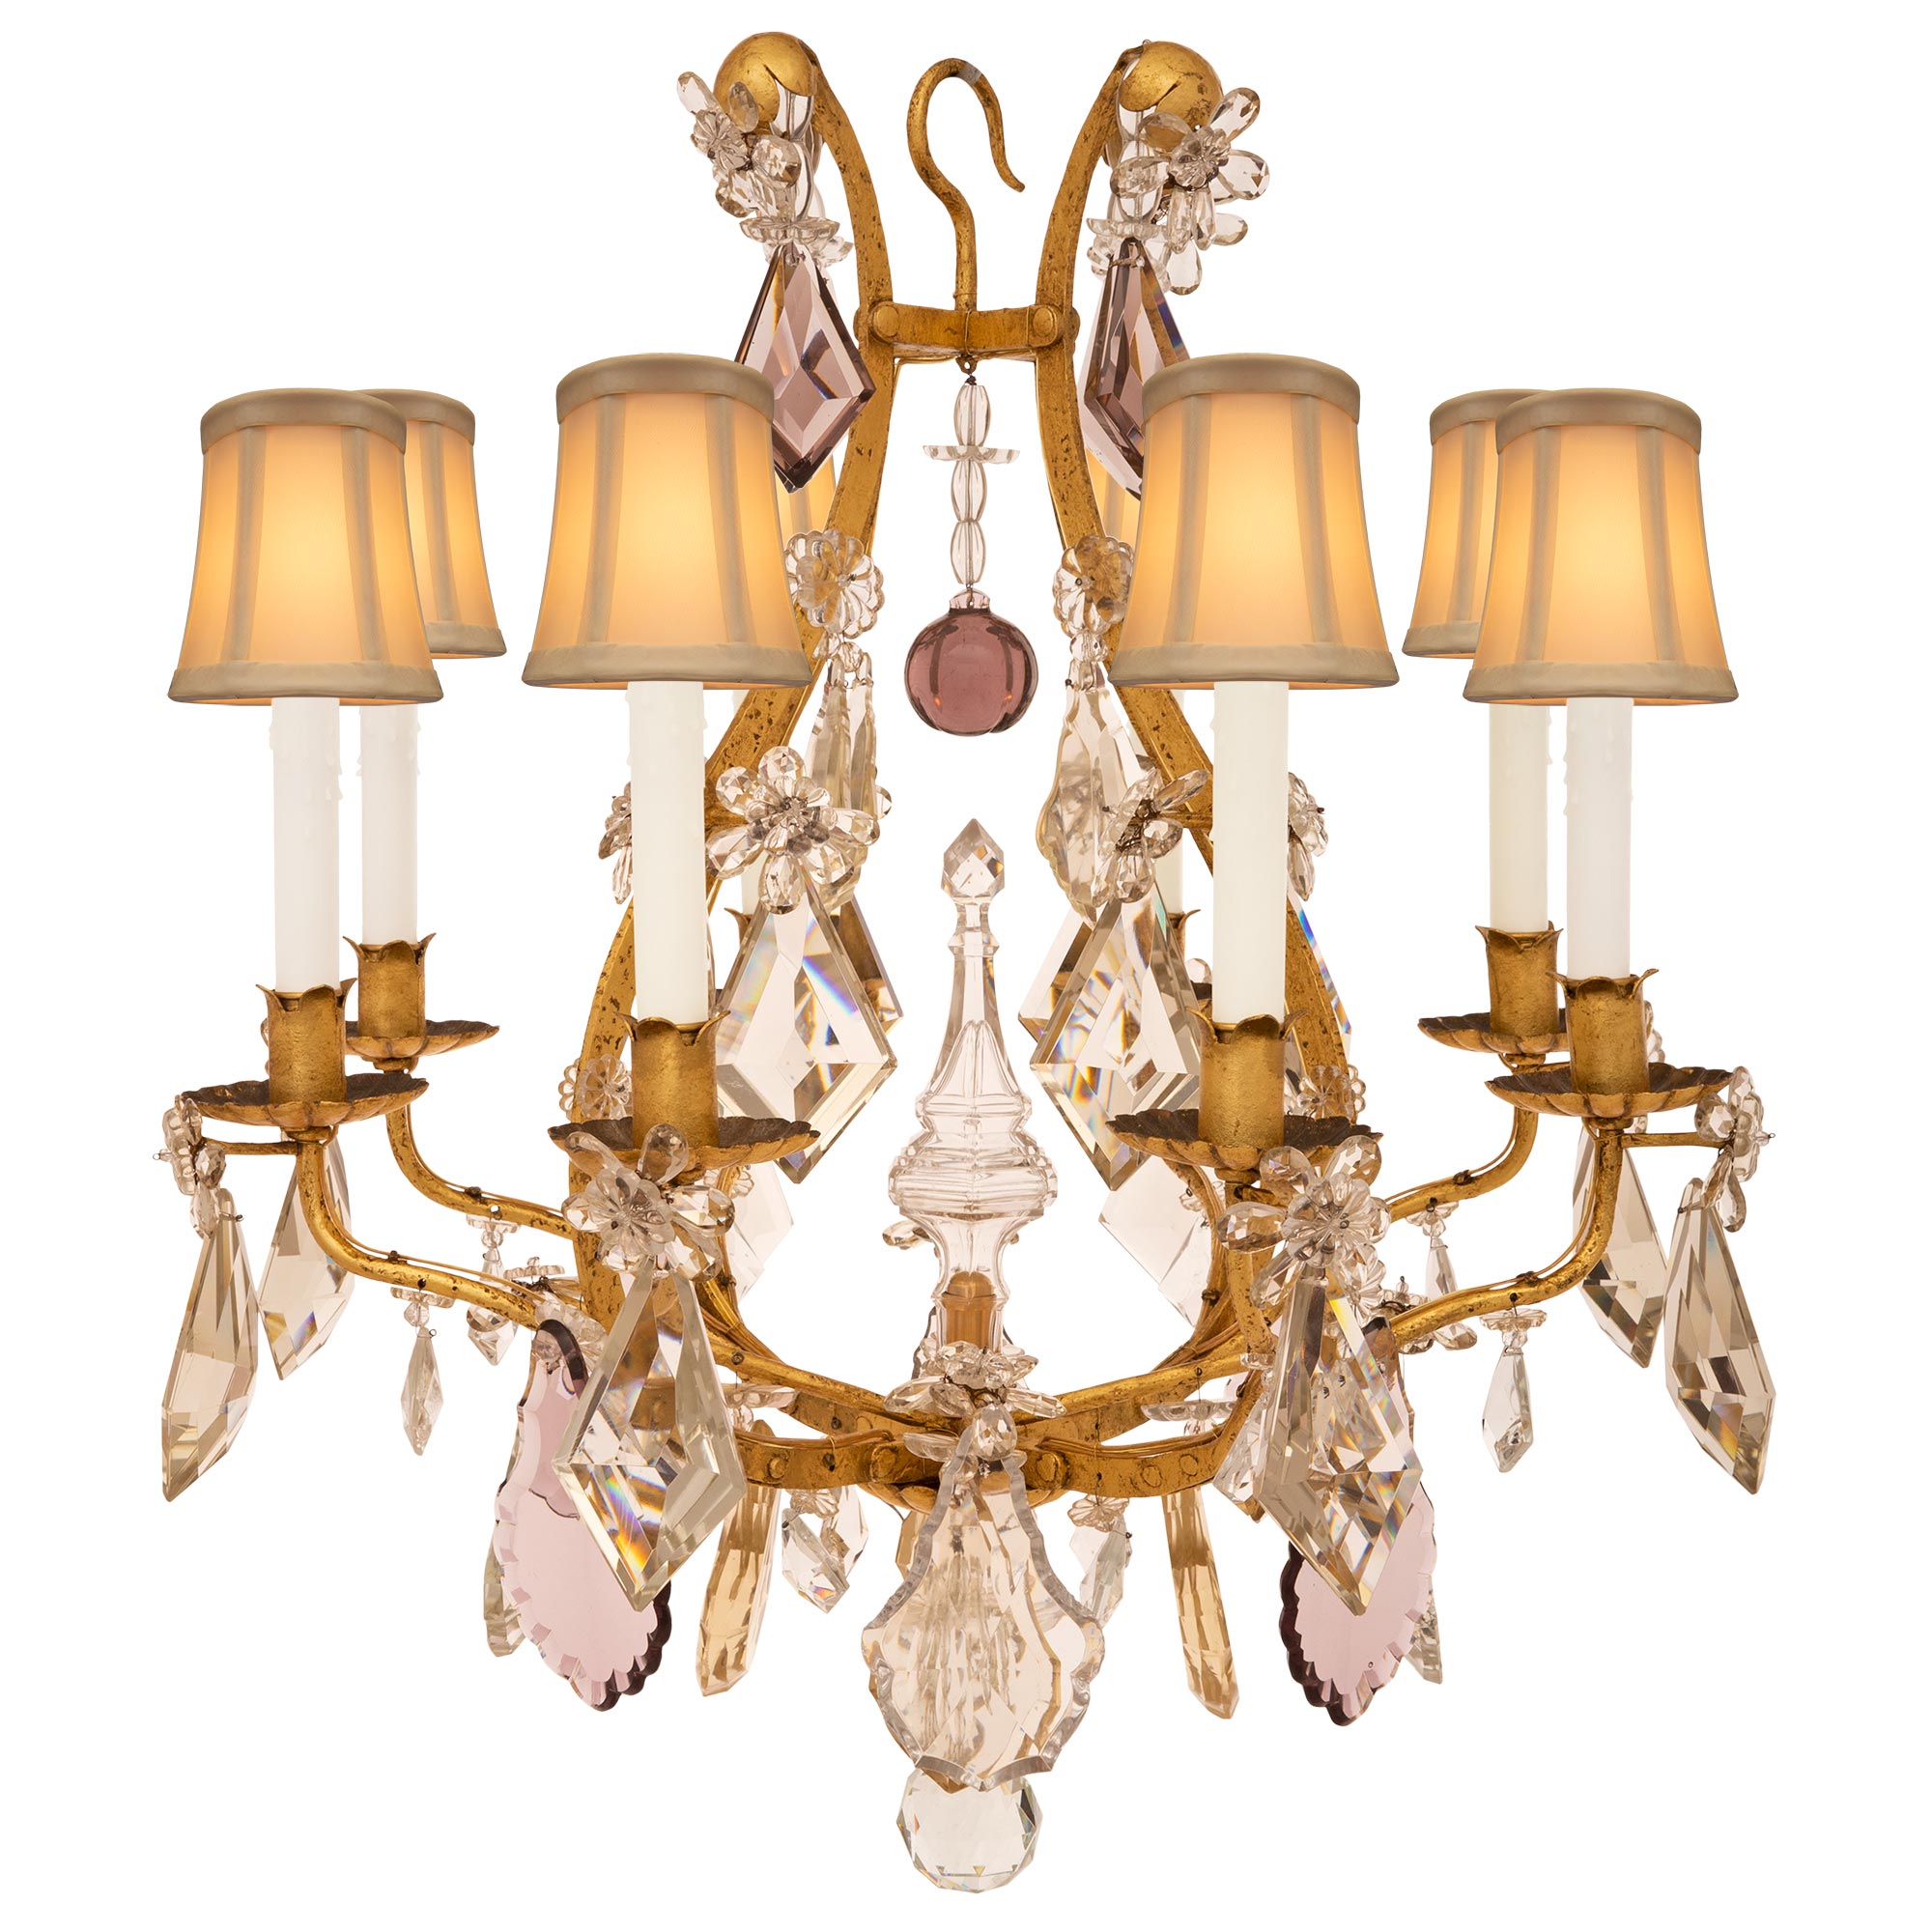 French 19th Century Louis XV St. Gilt Metal and Baccarat Crystal Chandelier